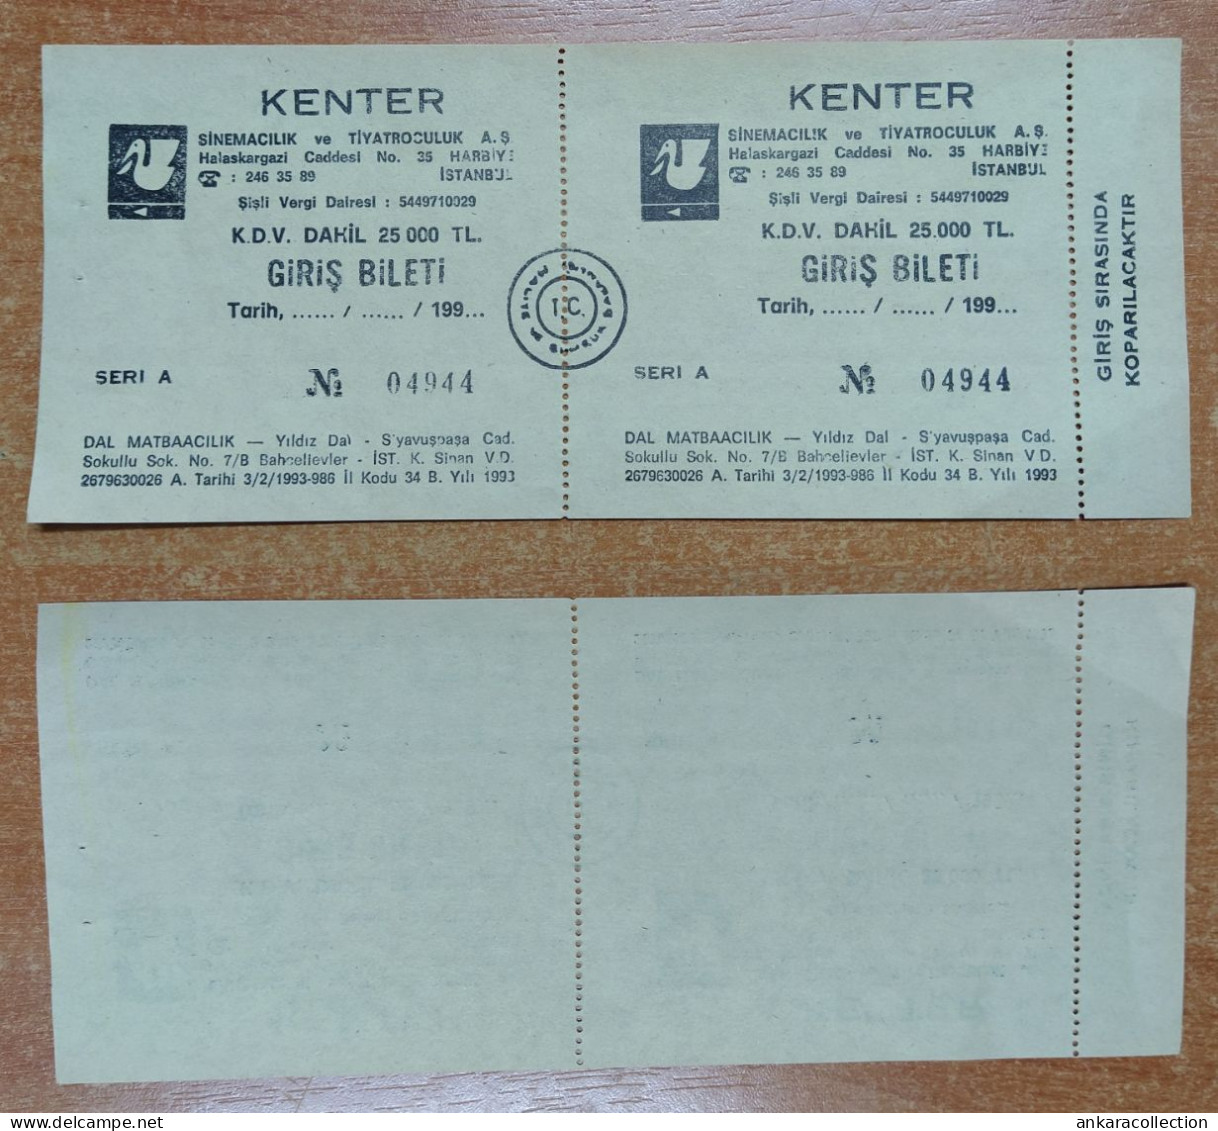 AC - KENTER  CINEMA & THEATER TICKET  1993  ISTANBUL TURKEY CONCERT TICKET WITH COUNTERFOIL - Concert Tickets